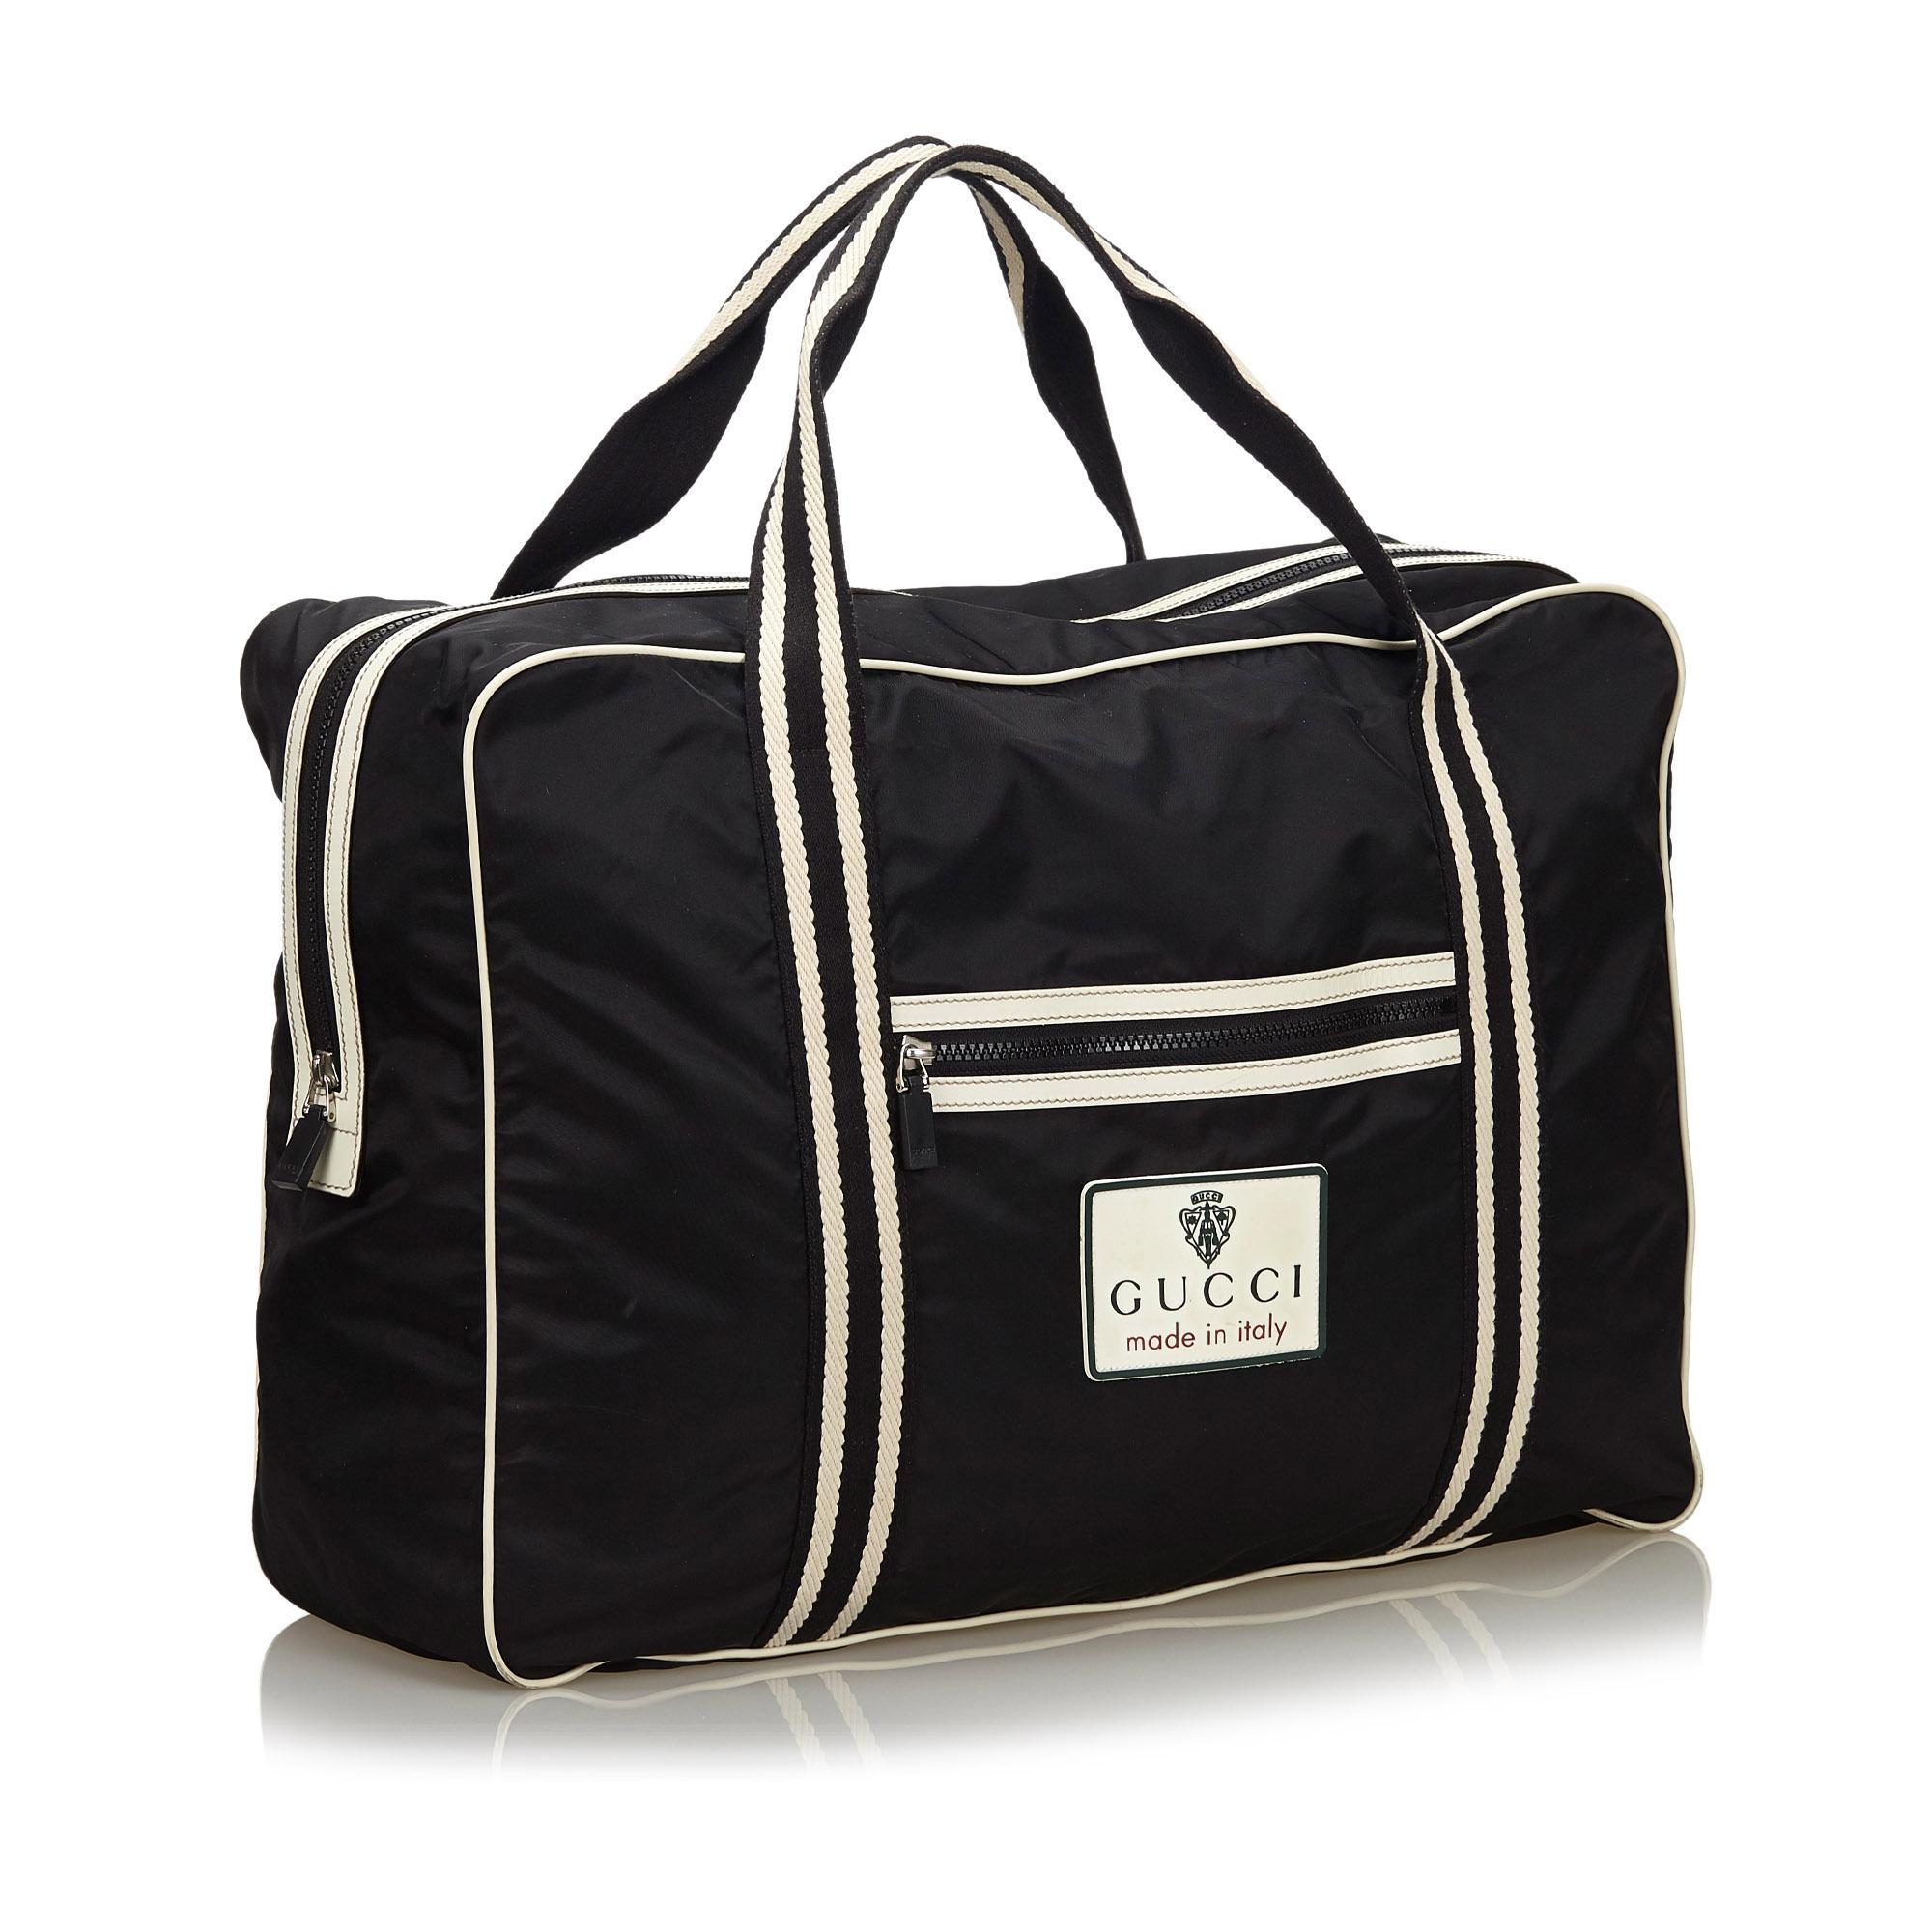 This travel bag features a nylon body with leather trim, a front exterior zip pocket, flat handles, a top zip closure, and interior slip pockets. It carries as B+ condition rating.

Inclusions: 
This item does not come with